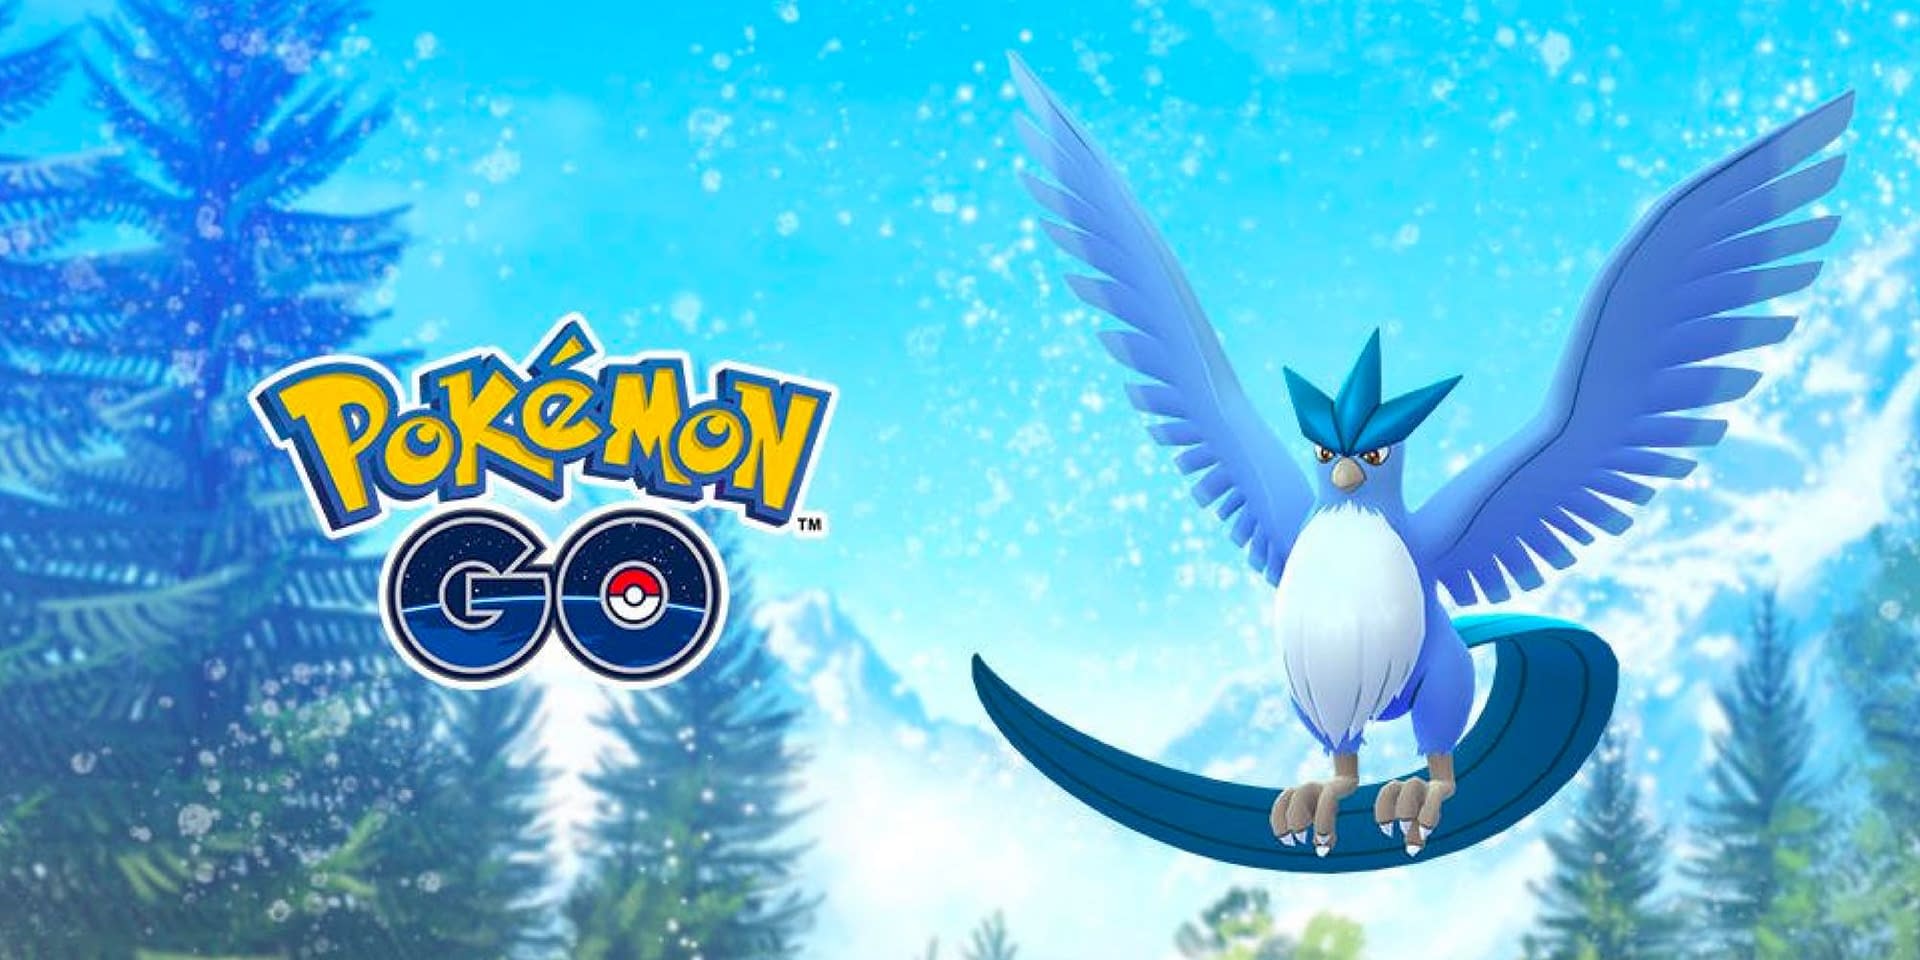 Raid Hour event featuring Nihilego available in Pokémon GO today